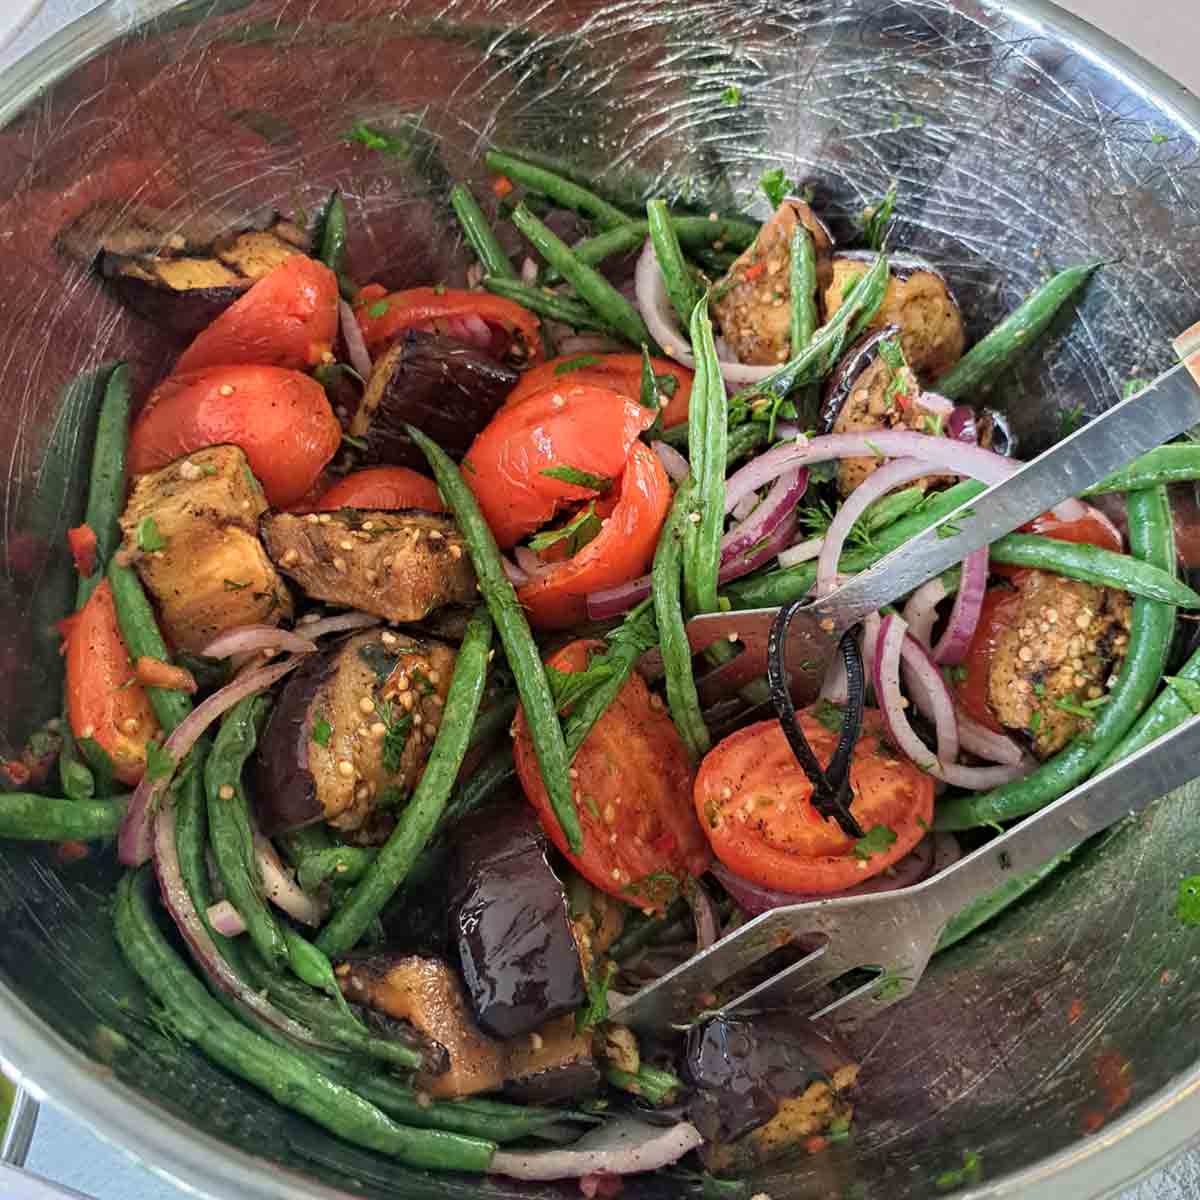 Grilled tomatoes, beans, eggplant, and onions in a metal bowl with serving tongs.